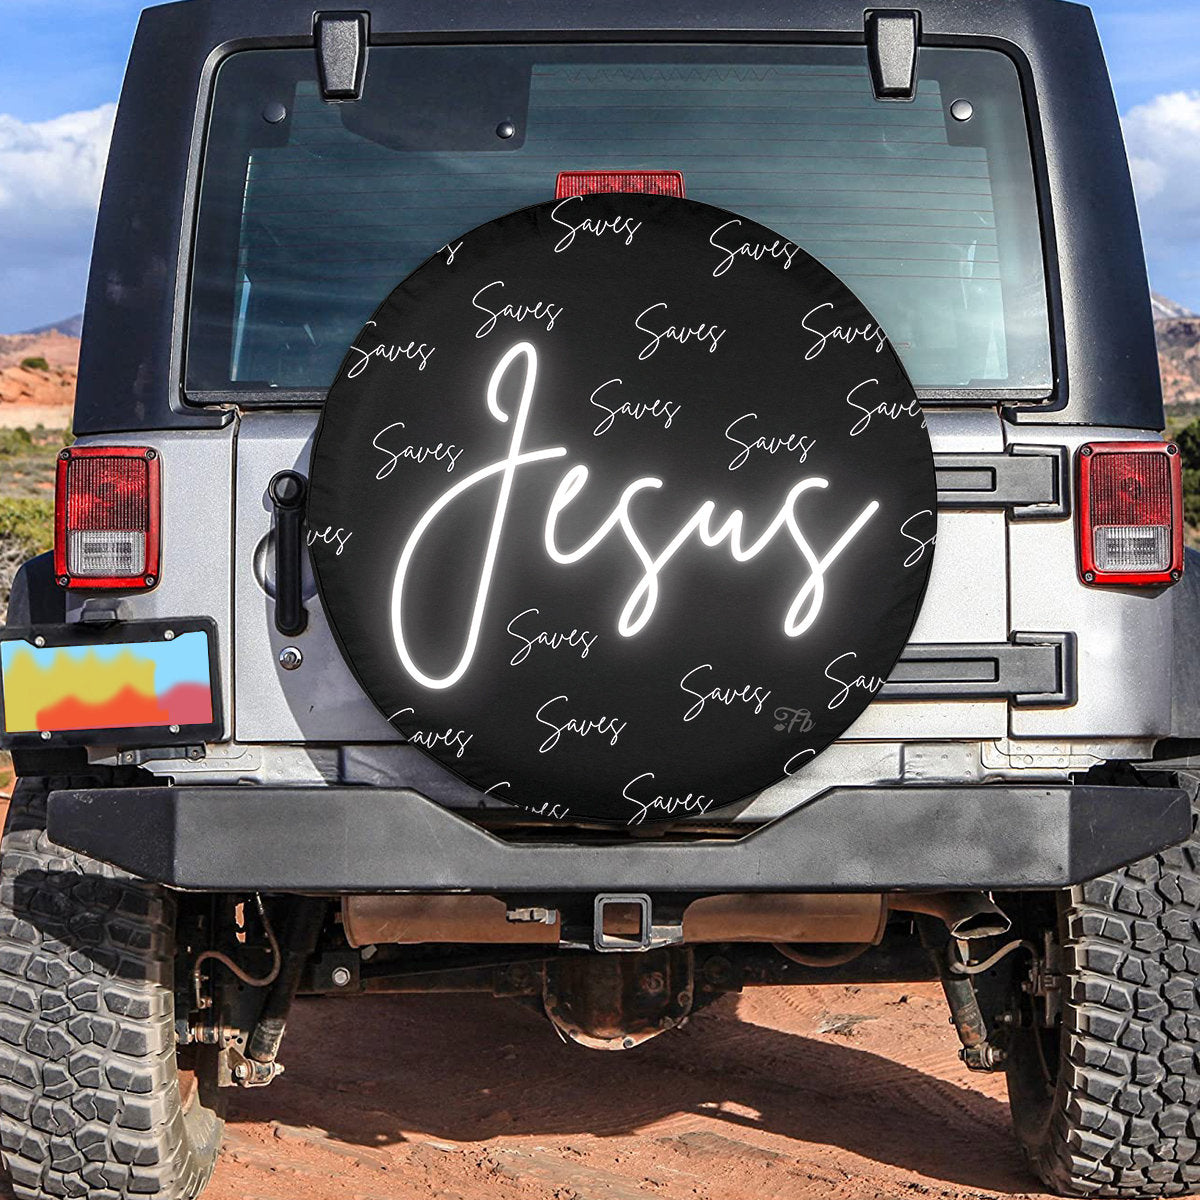 Jesus Saves From Darkness To Light Tire Cover - Jesus Safe Life Wheel Cover - God Gift